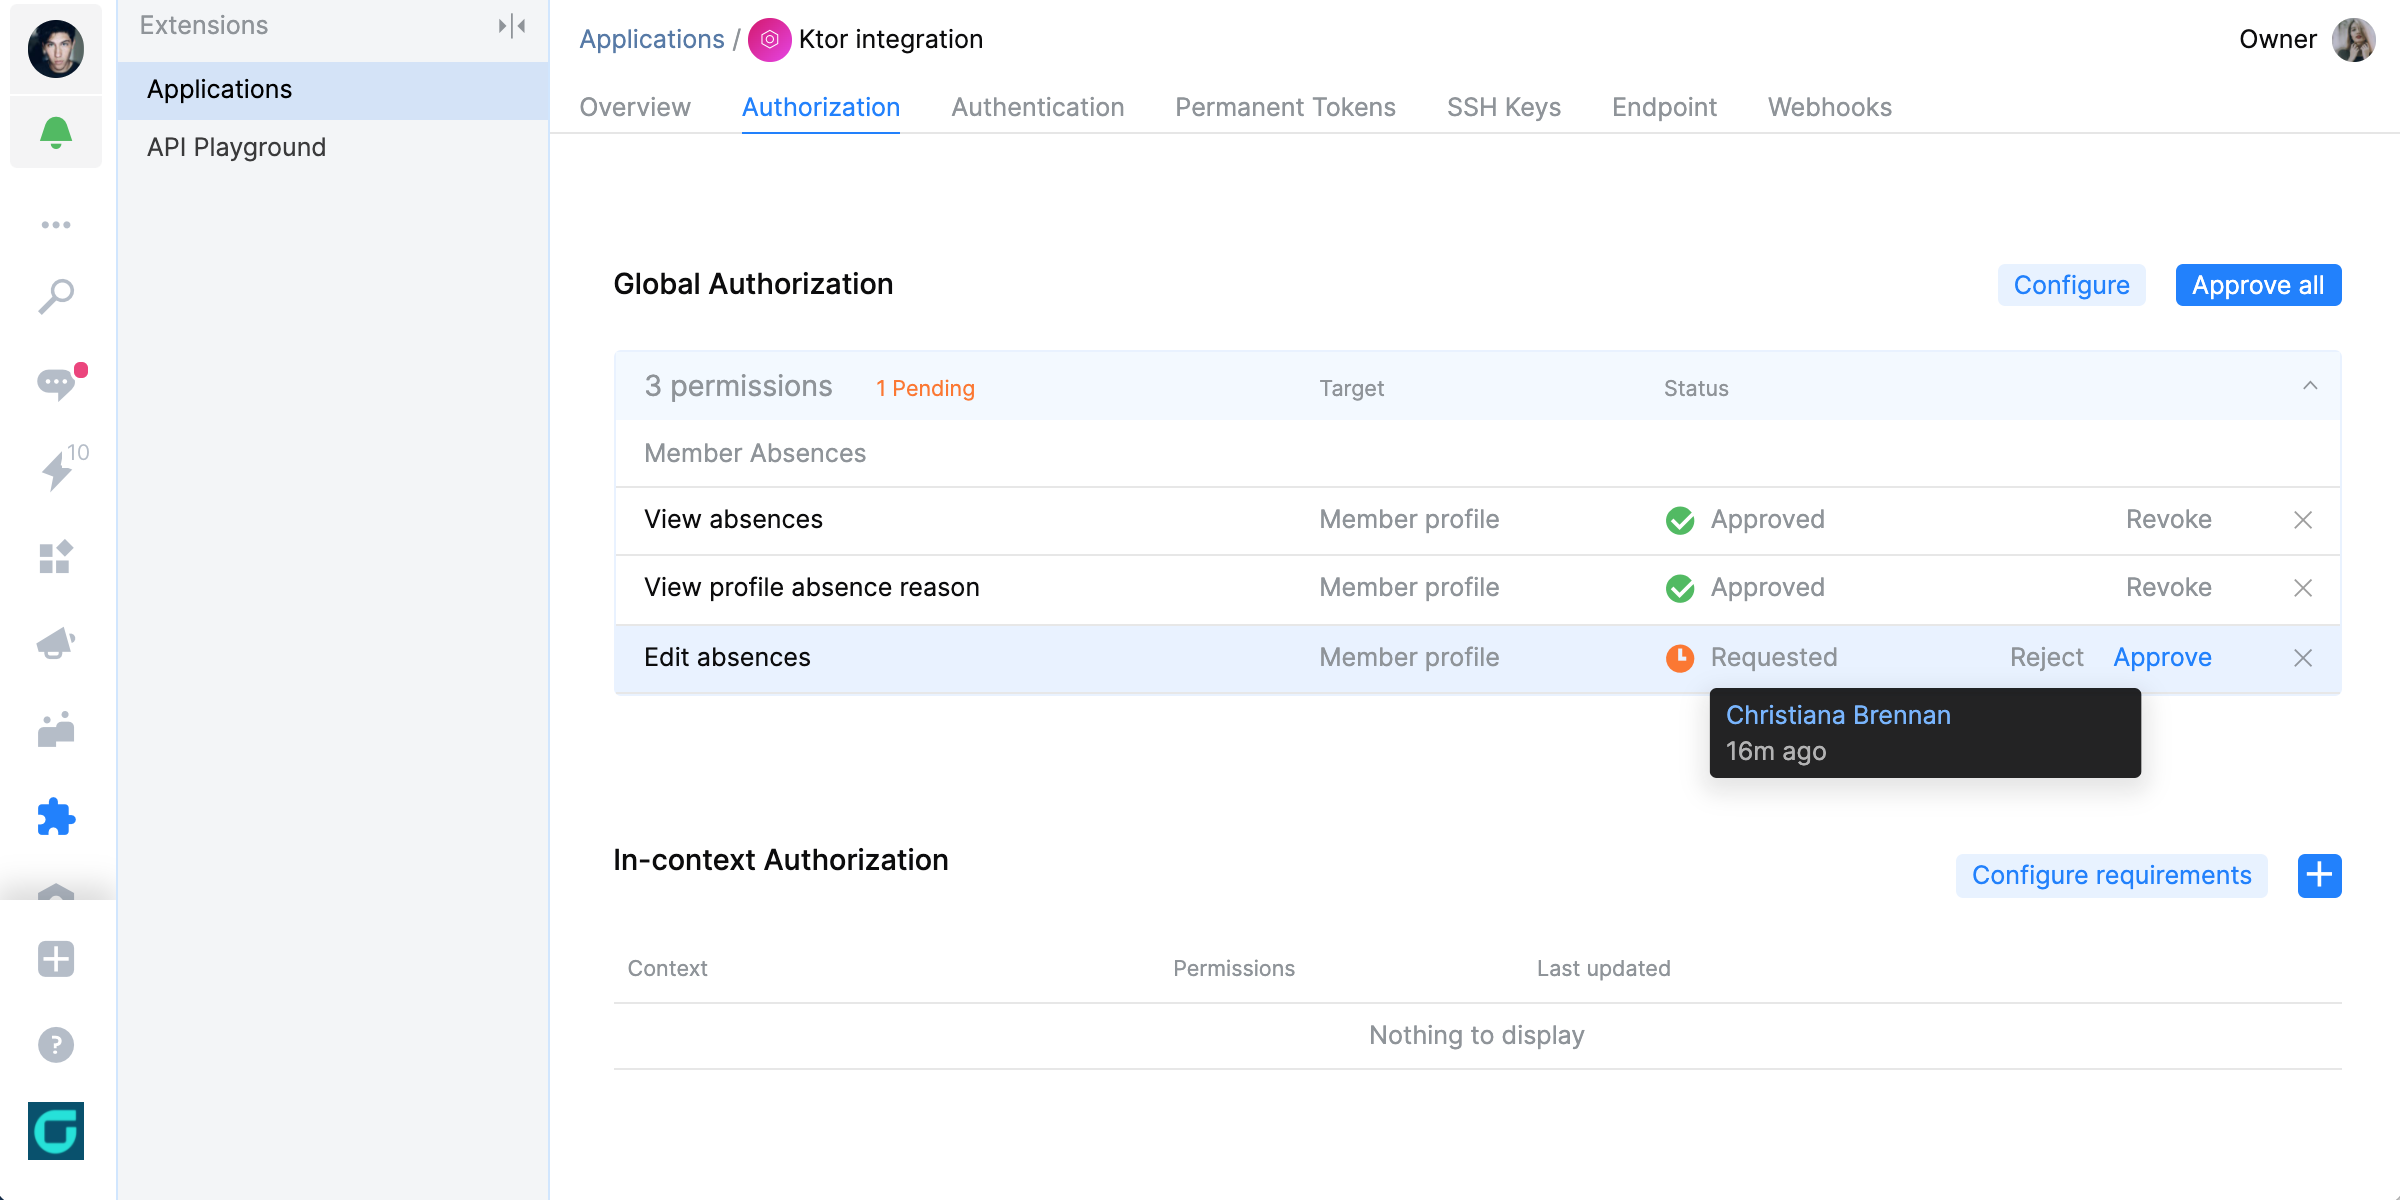 New application permission UI and enhanced authorization workflow